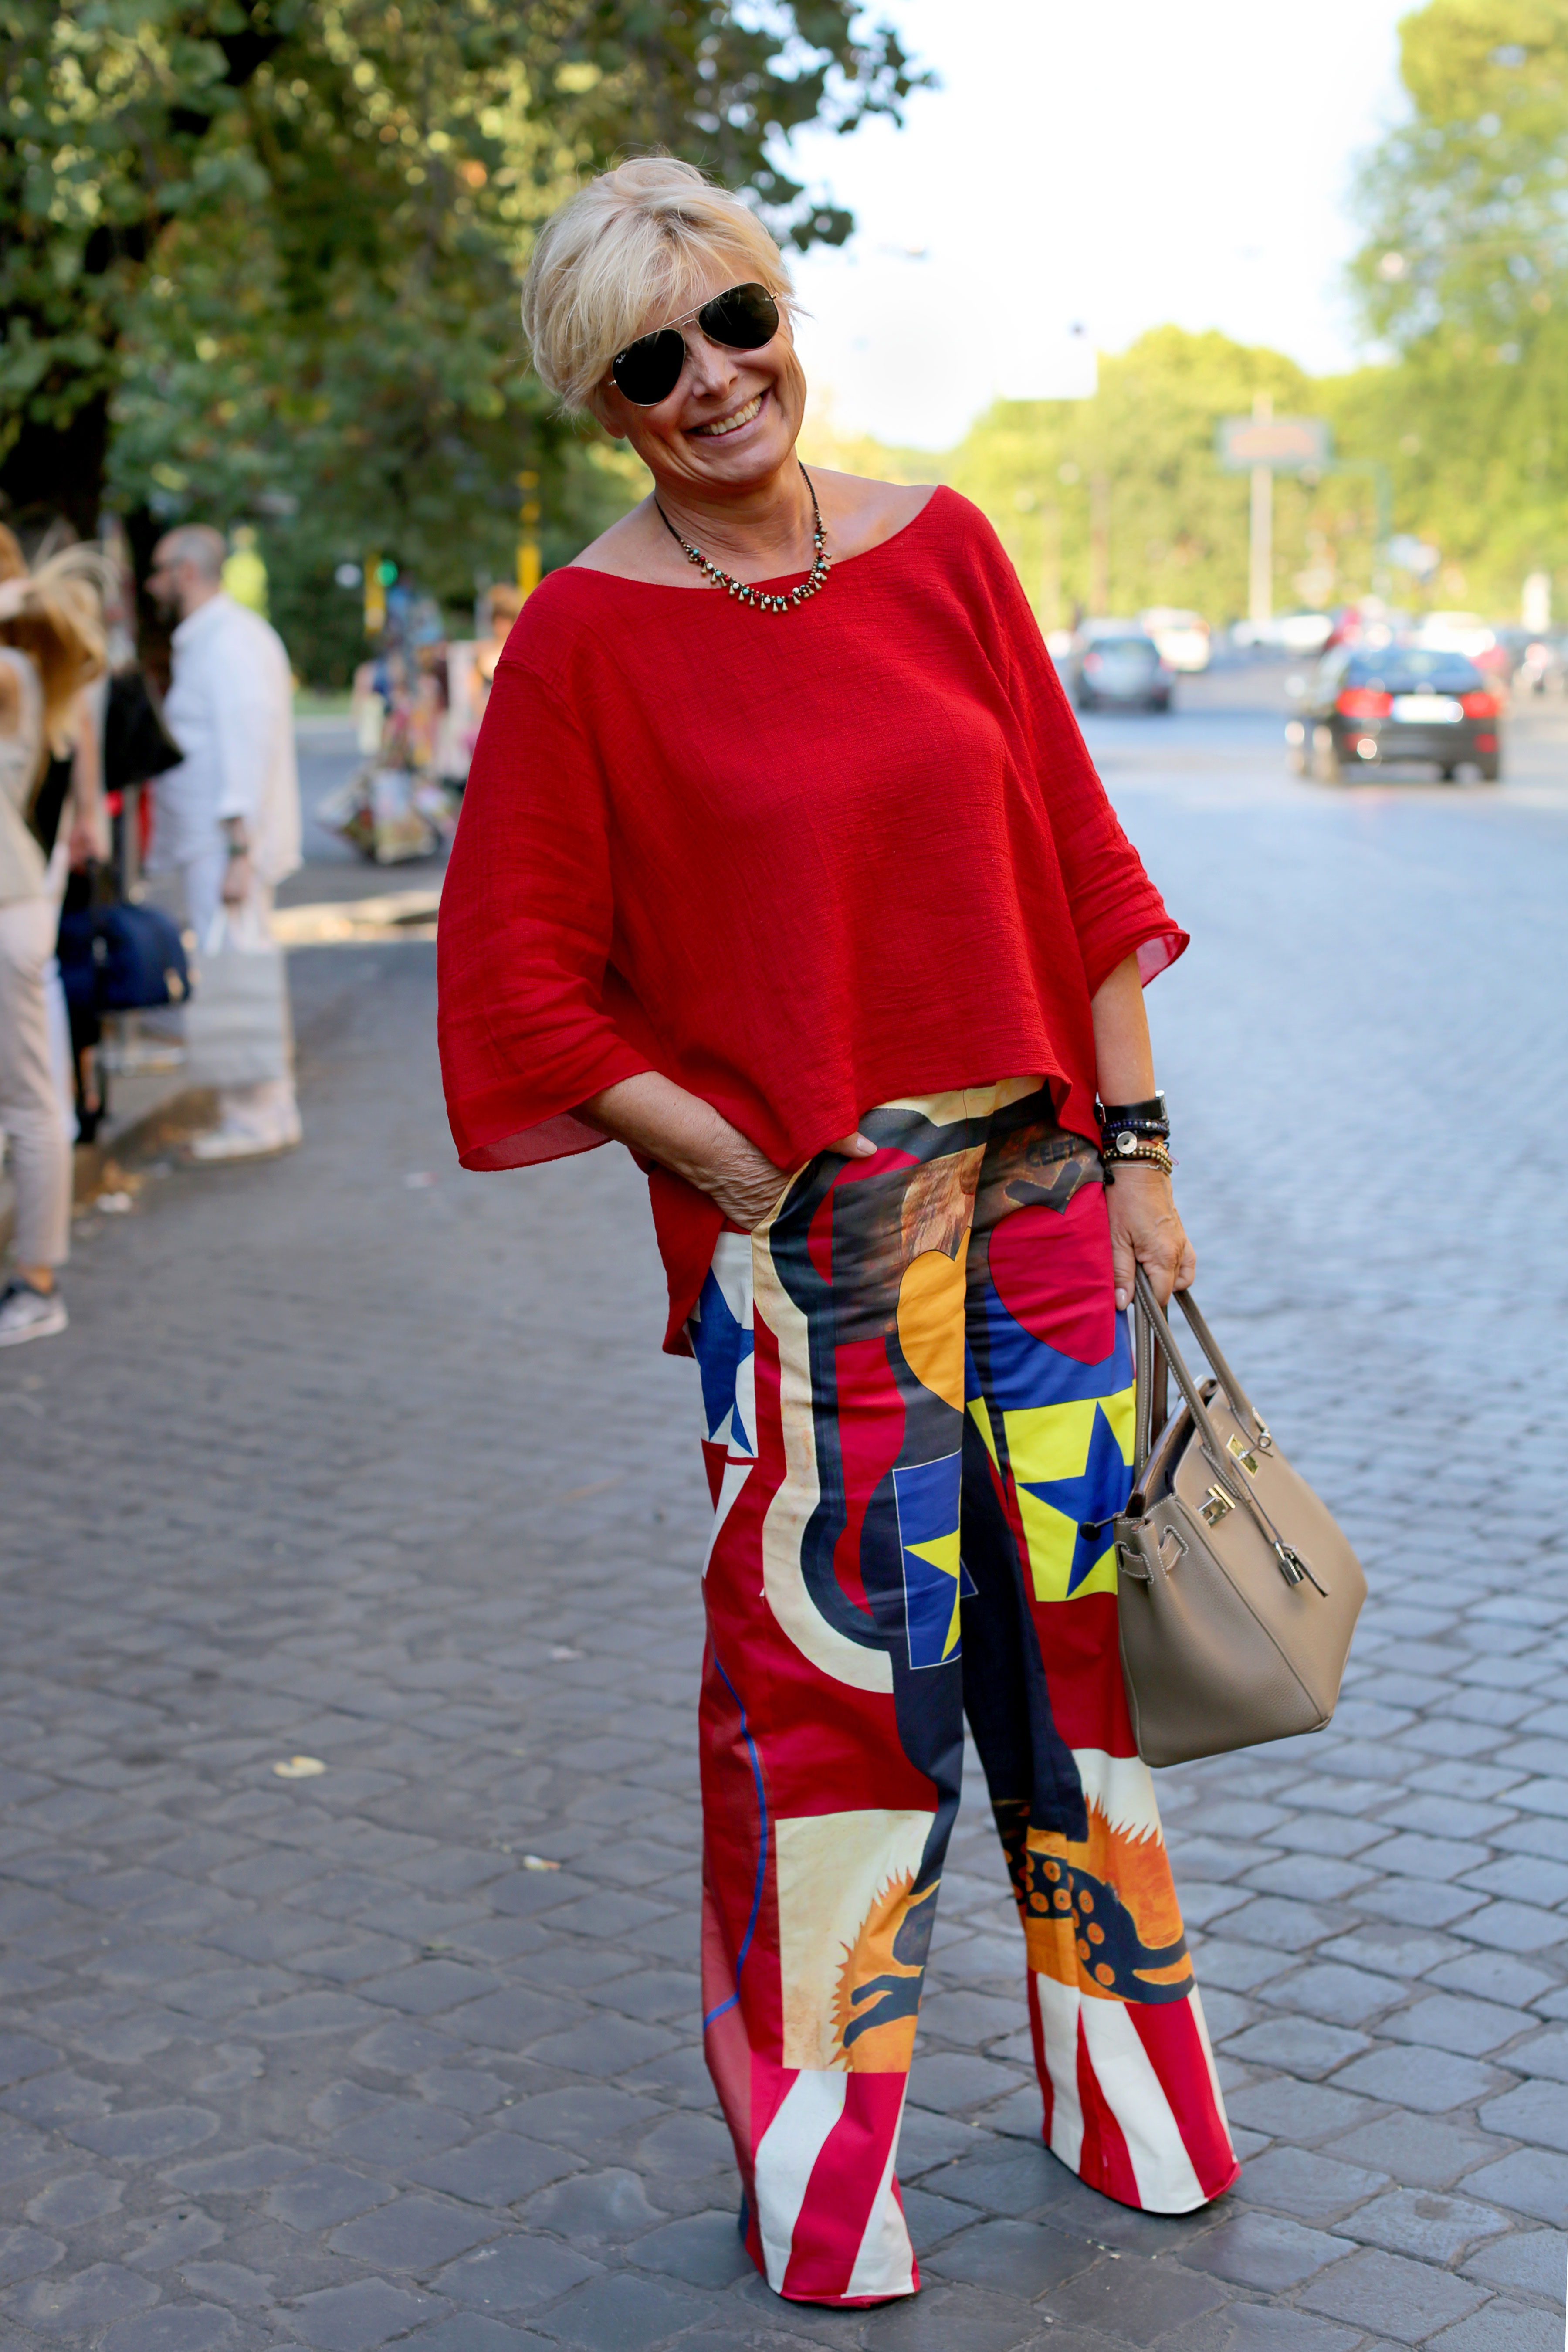 In The Red - Advanced Style